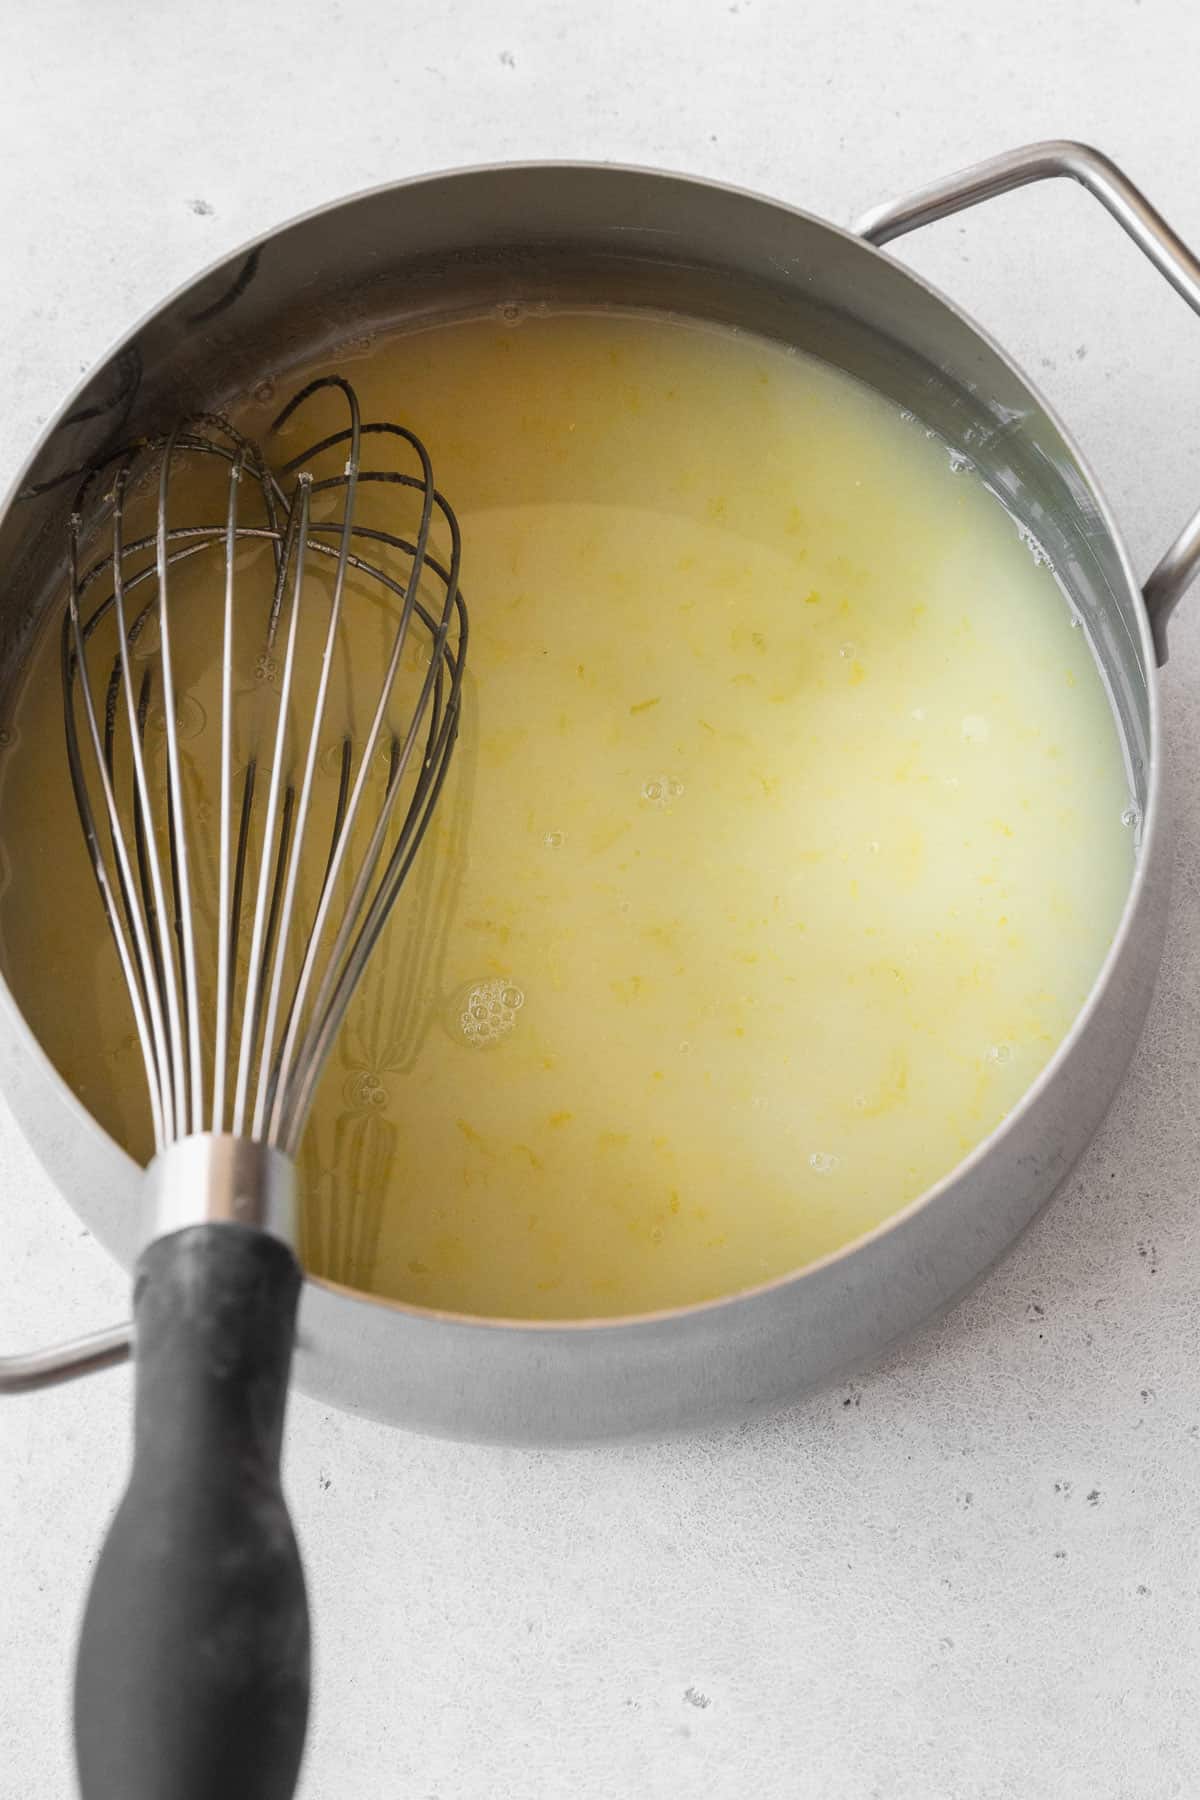 Whisked lemon juice, zest, and sugar in a pot.